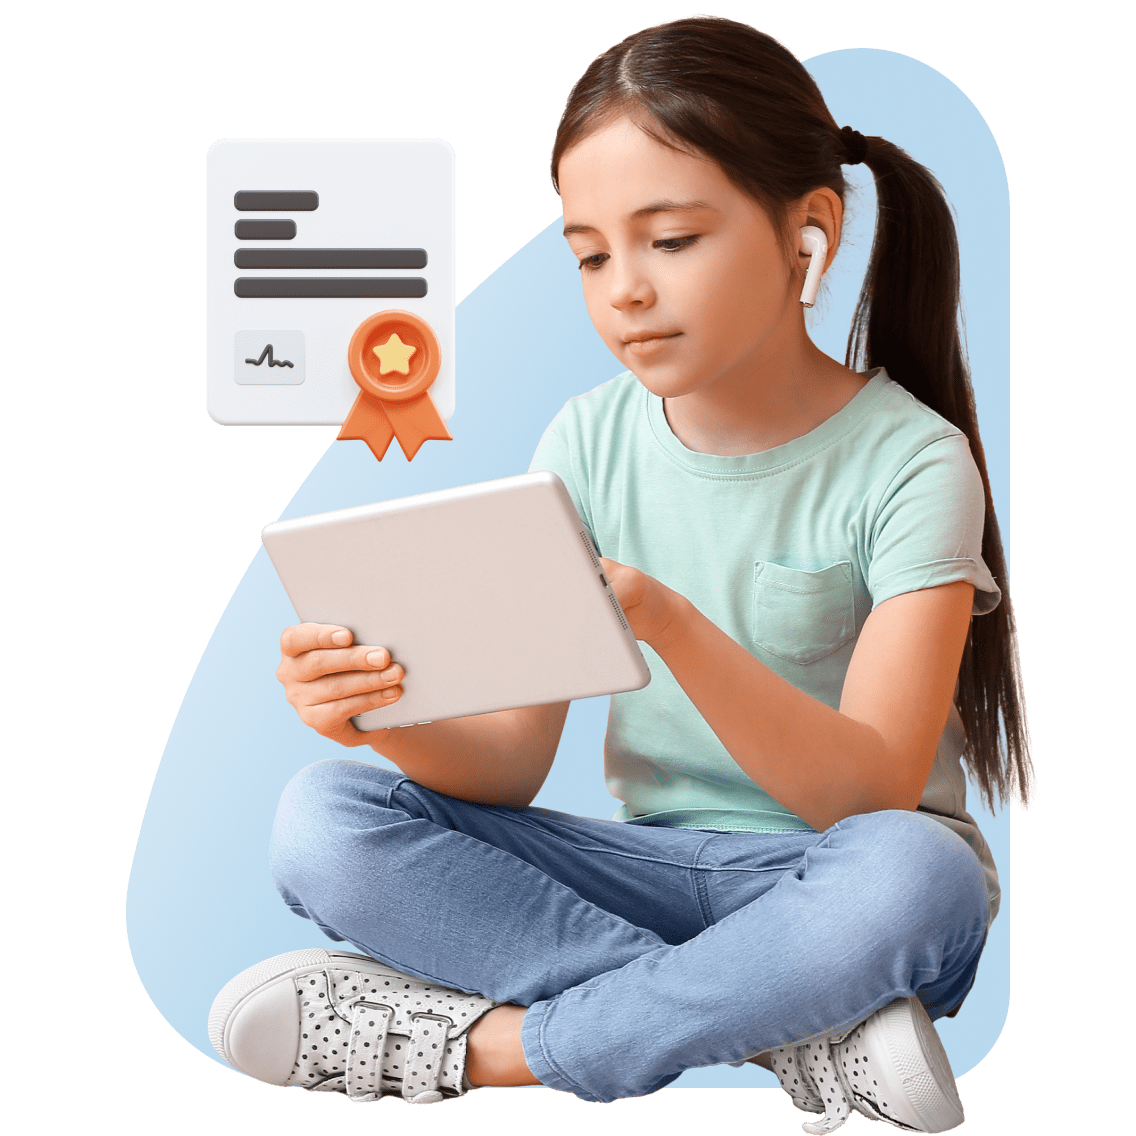 Ohio Online Schools image 7 (name 2 Young Girl Tablet Airpods Certificate)